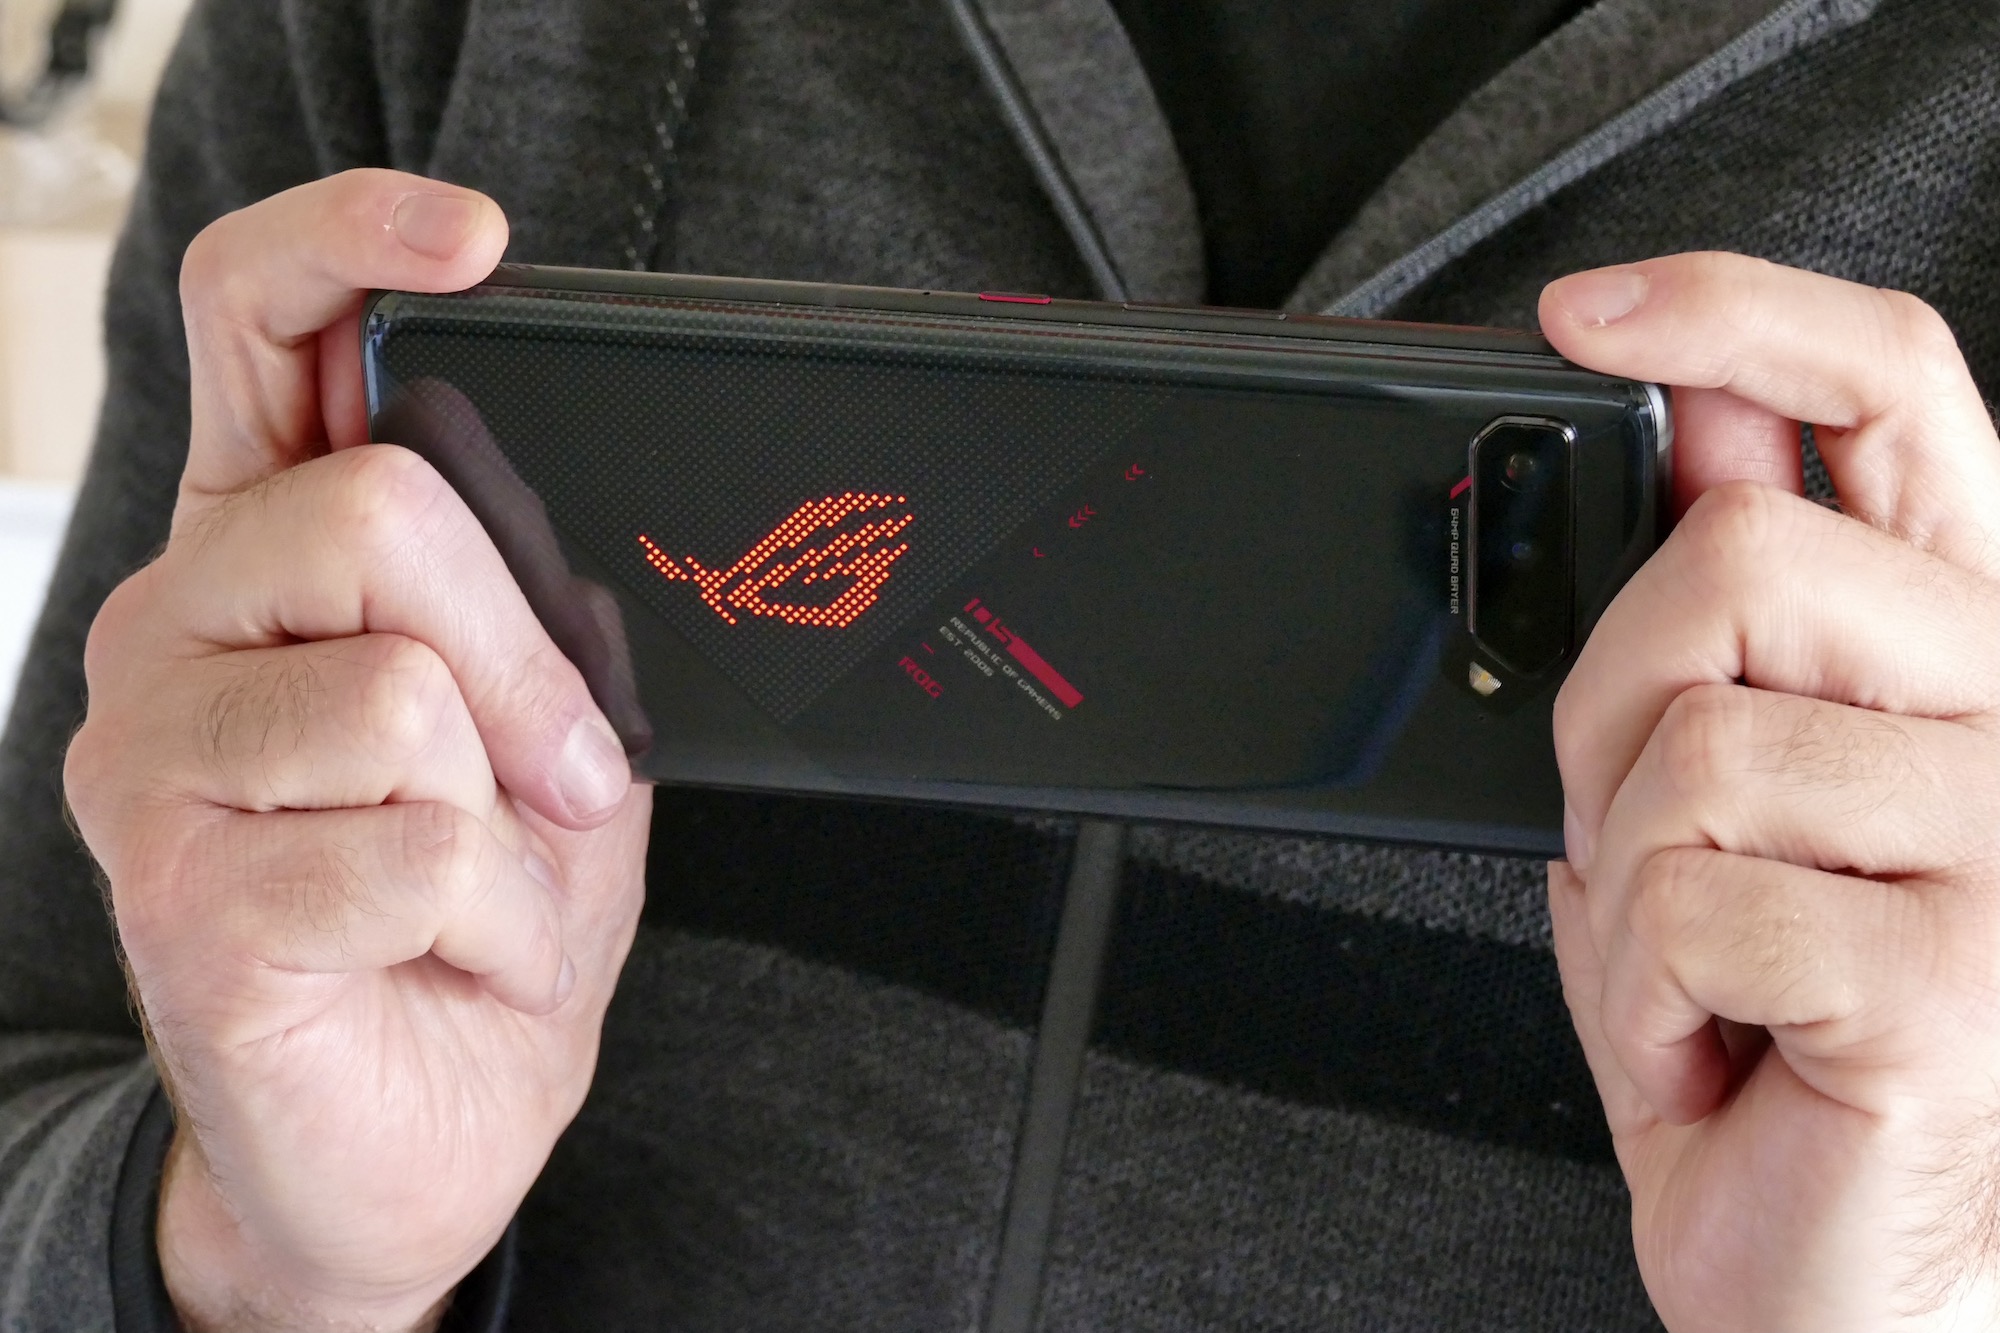 Asus Rog Phone 5 Review: A Mighty Exciting Gaming Phone | Digital Trends